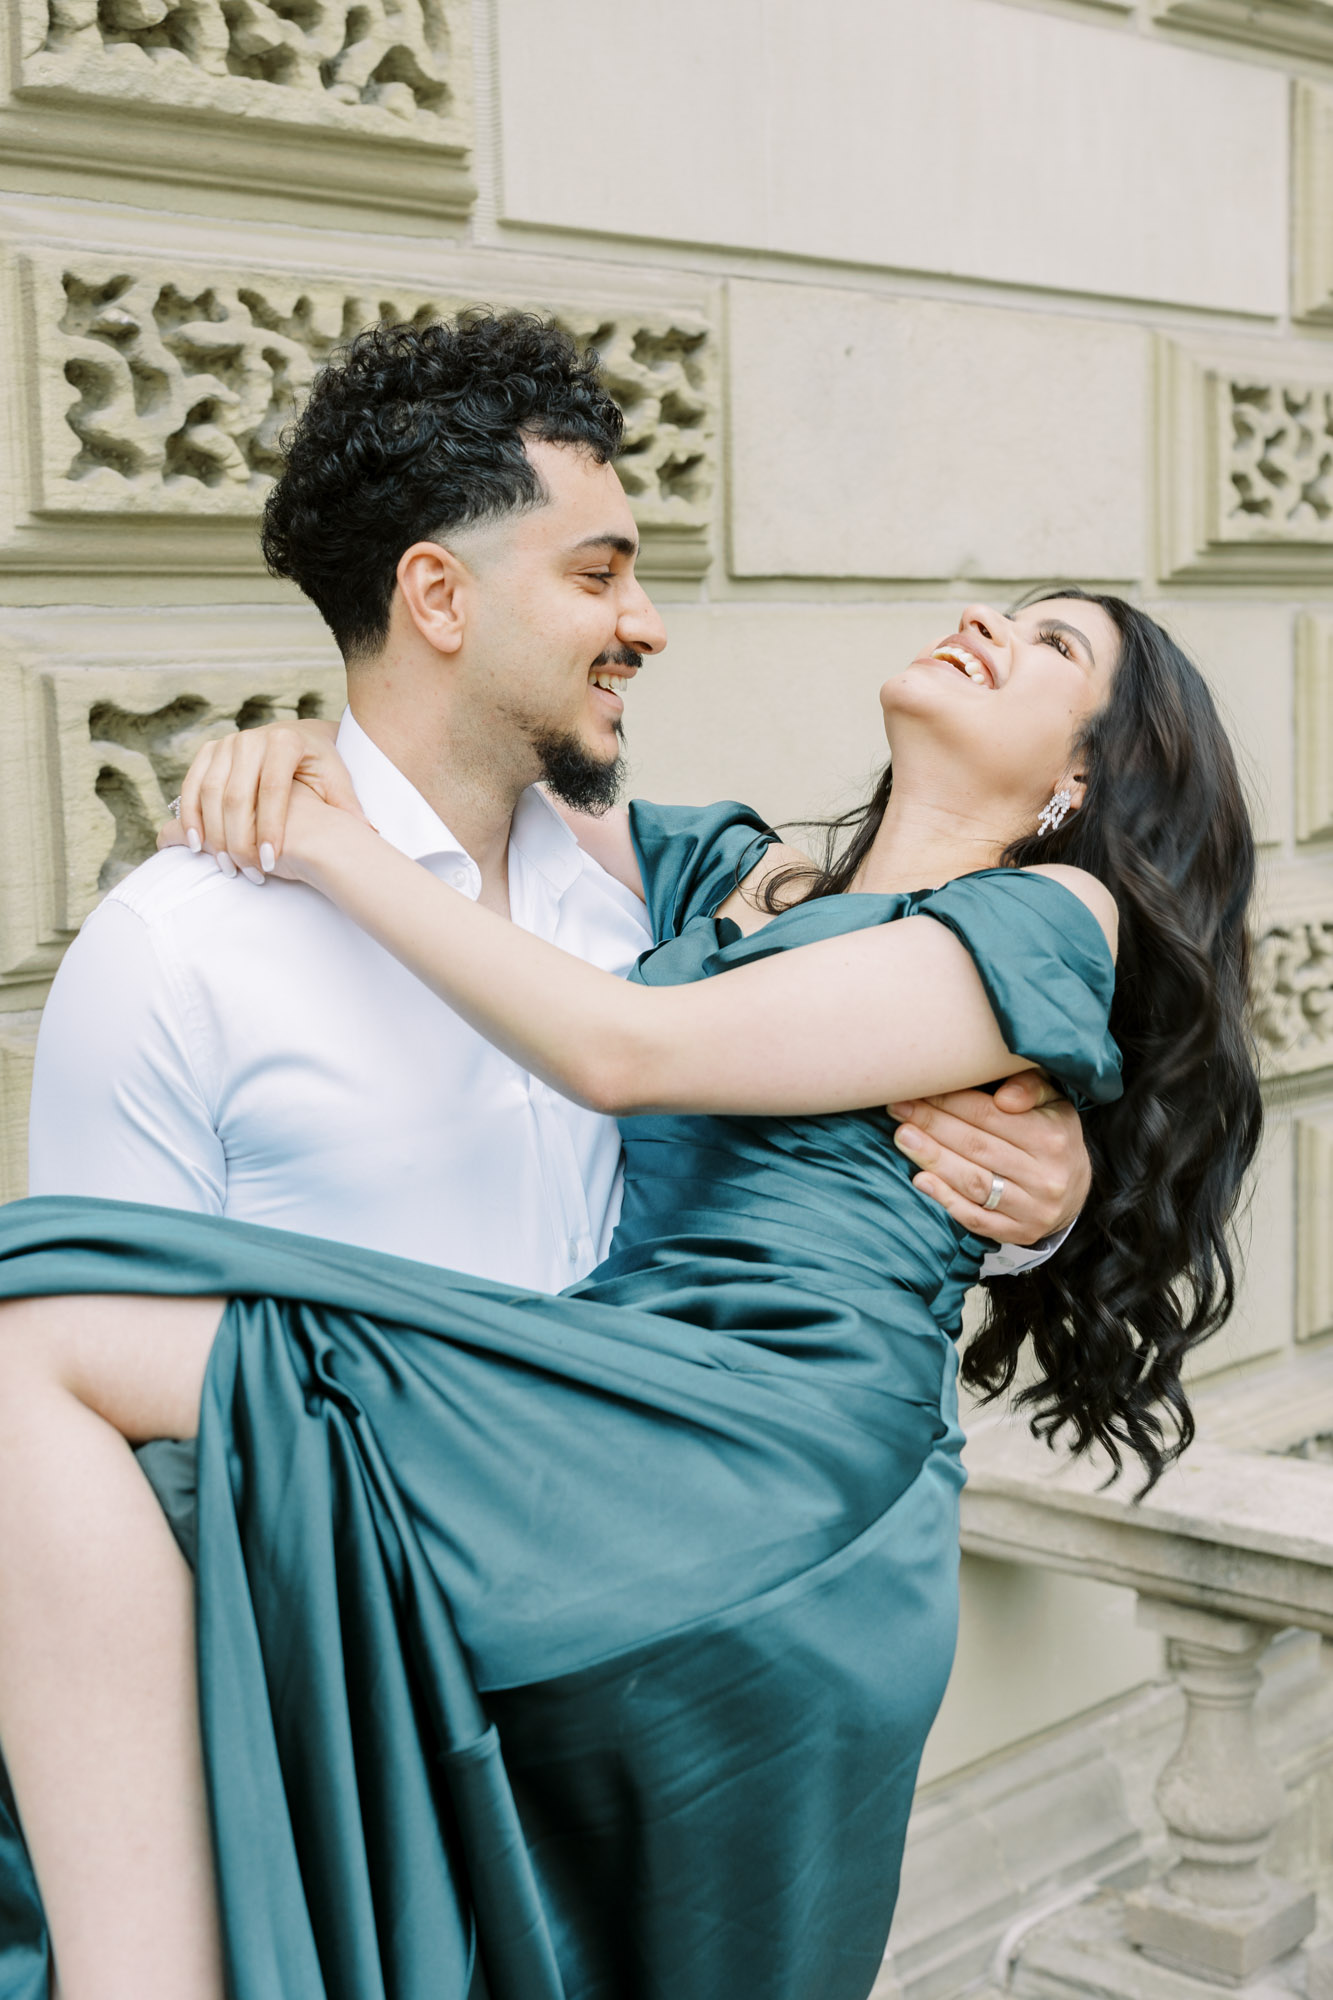 Man carrying fiancé at Osgoode Hall while she laughs